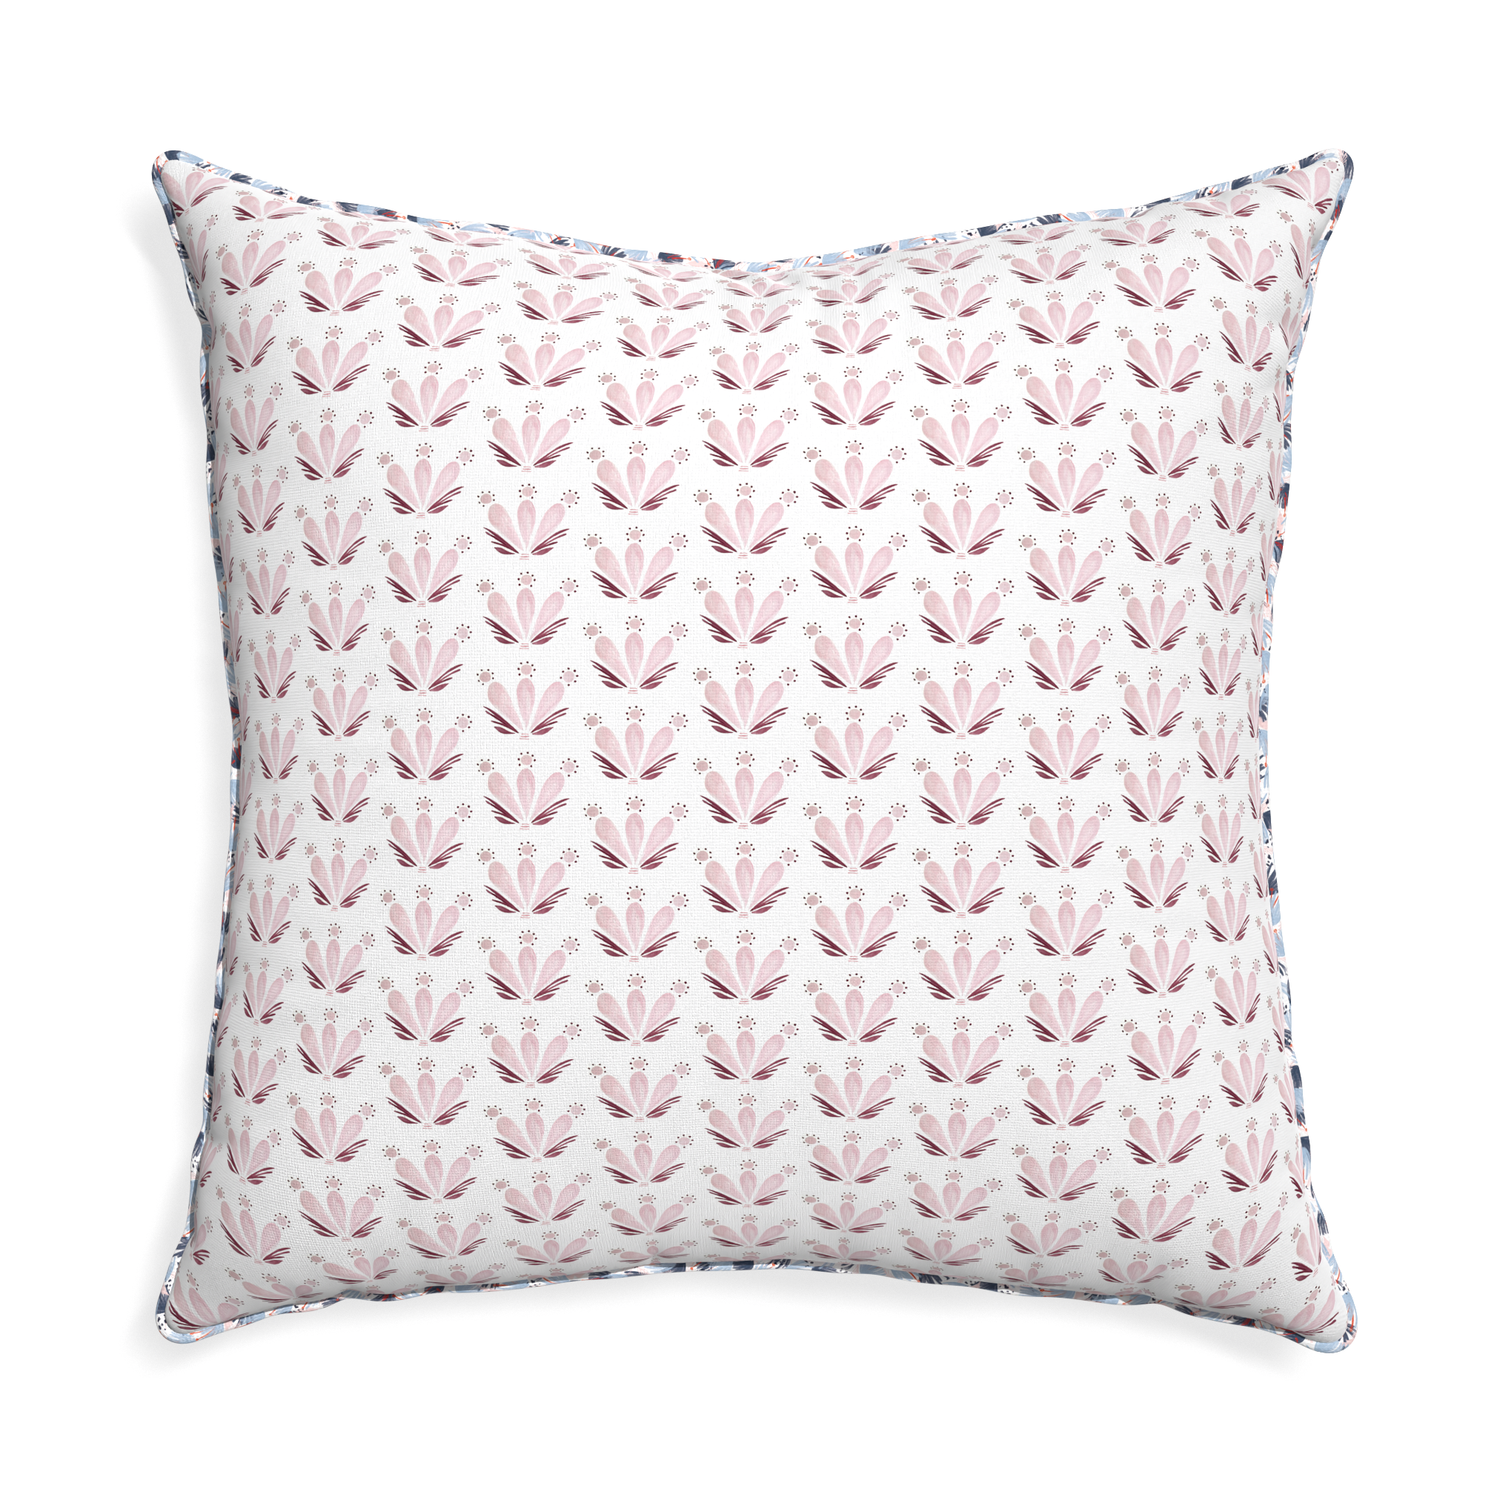 Euro-sham serena pink custom pink & burgundy drop repeat floralpillow with e piping on white background